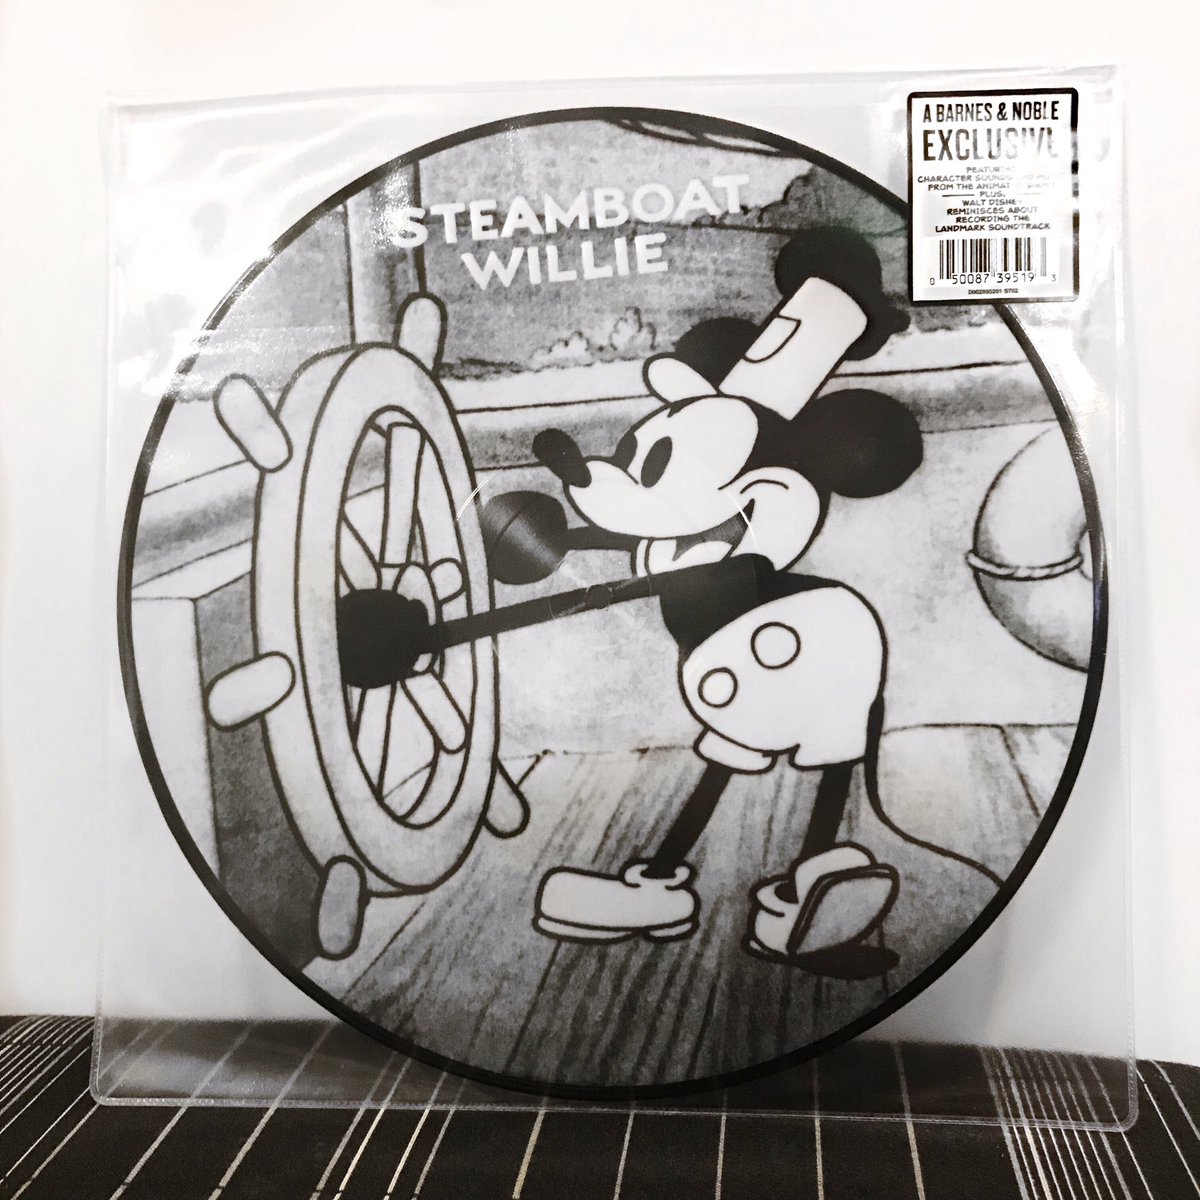 Nov. 16-18 is Vinyl Weekend at @BNBuzz, featuring dozens of new exclusives like #SteamboatWillie, plus 10% off hundreds of vinyl albums in store and online at BN.com/vinyl #BNVinyl 🎶 

barnesandnoble.com/w/steamboat-wi…